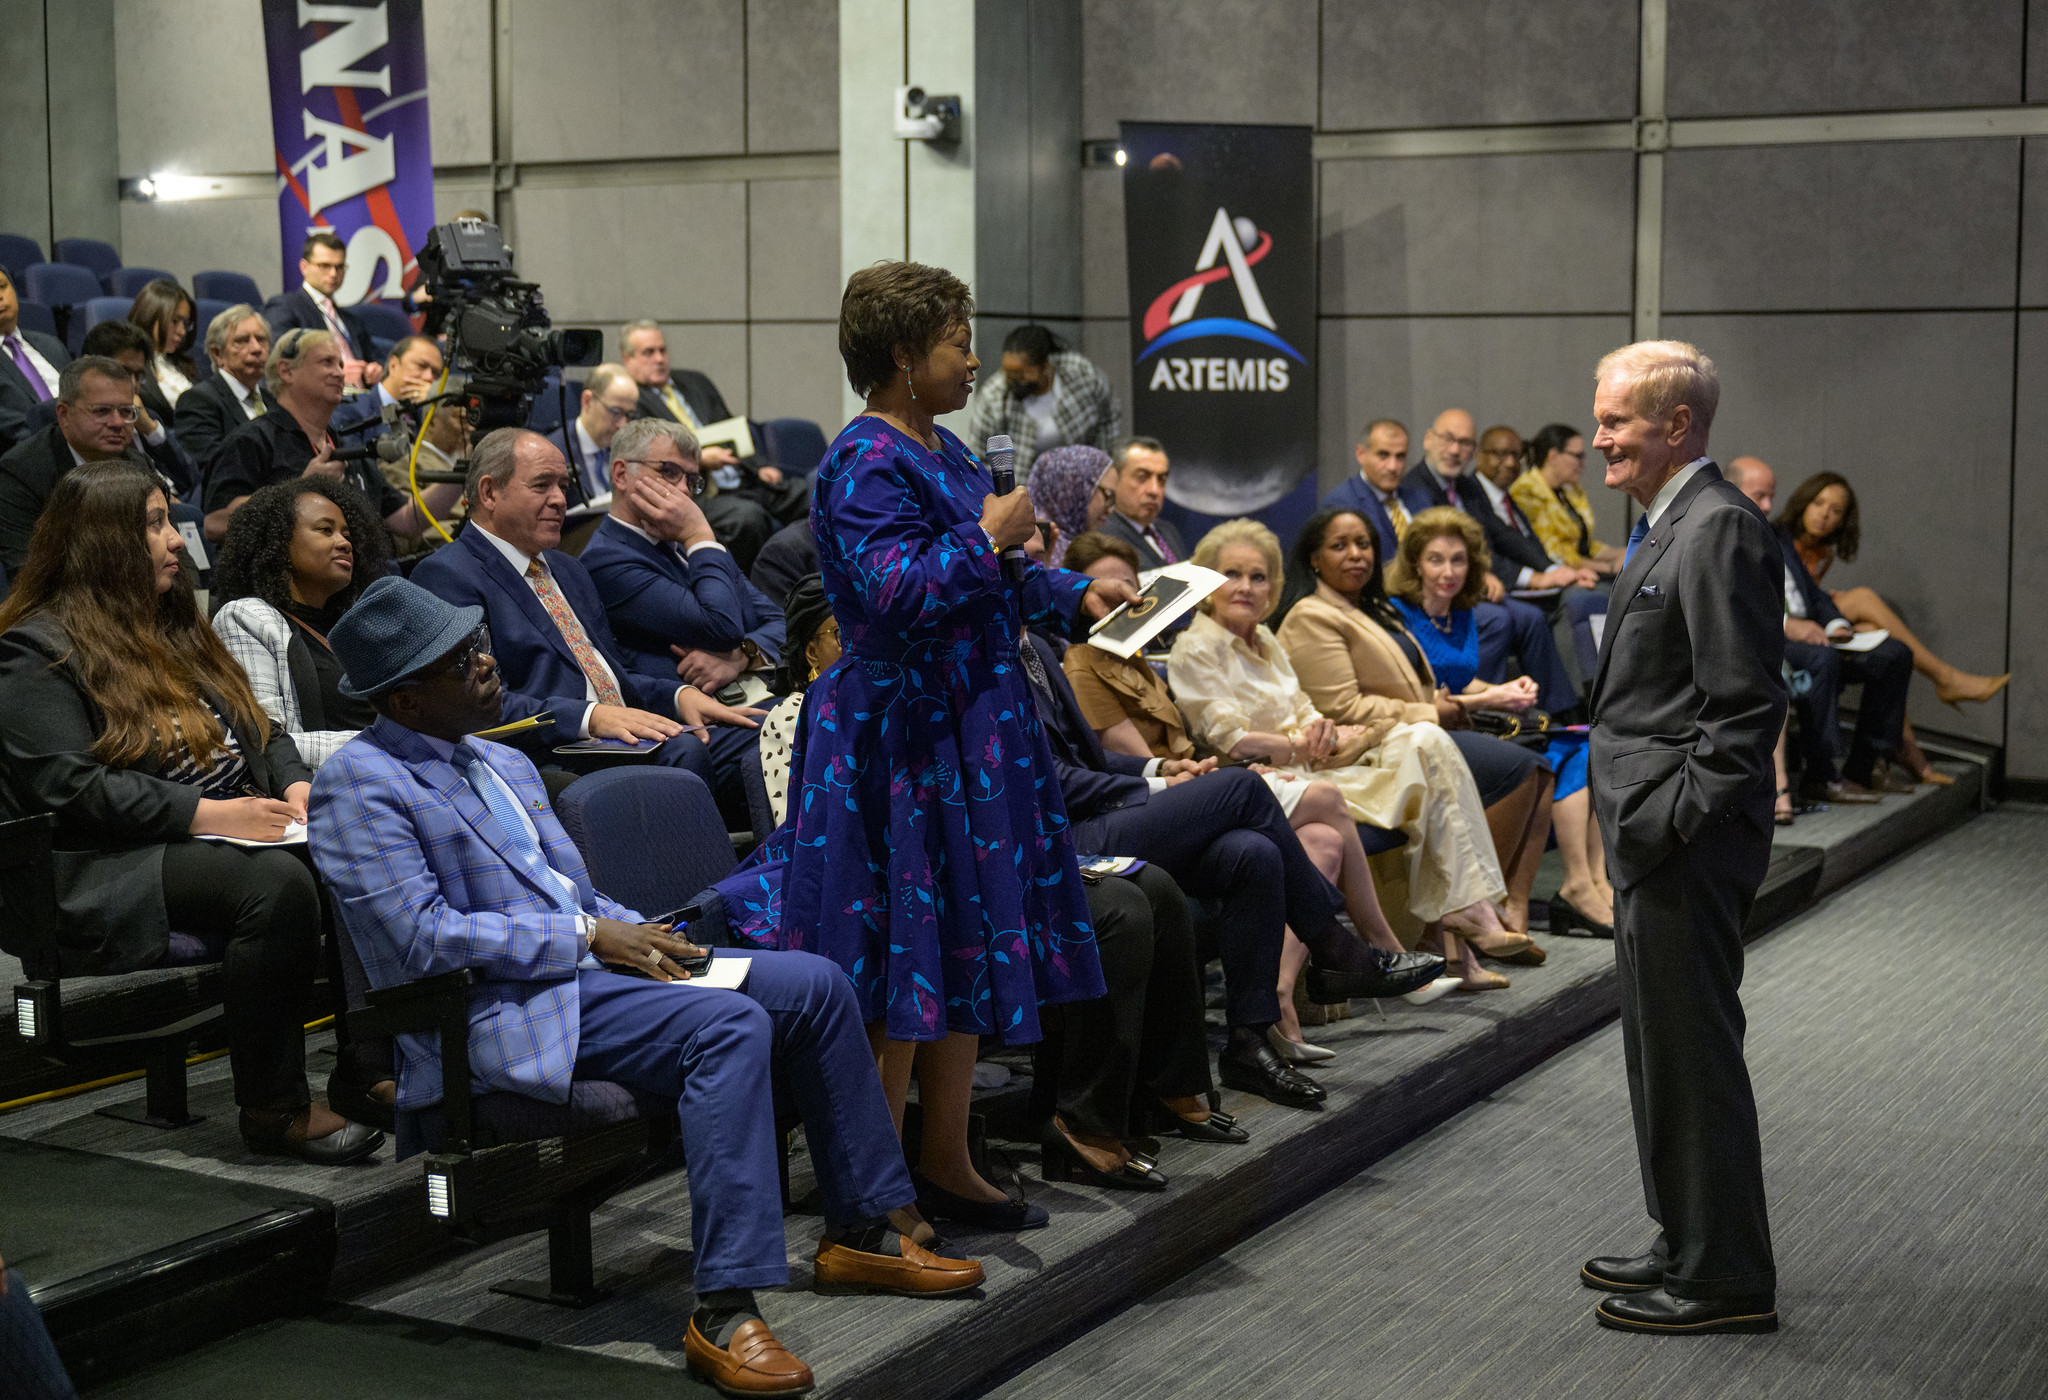 In an auditorium at NASA Headquarters, NASA Administrator Bill Nelson, standing, listens to a woman who is standing and speaking into a microphone to ask a question during a U.S. Department of State Open House. Attendees of the event fill the four rows of seats visible in the image, and a banner with NASA Artemis Program logo is seen in the background.